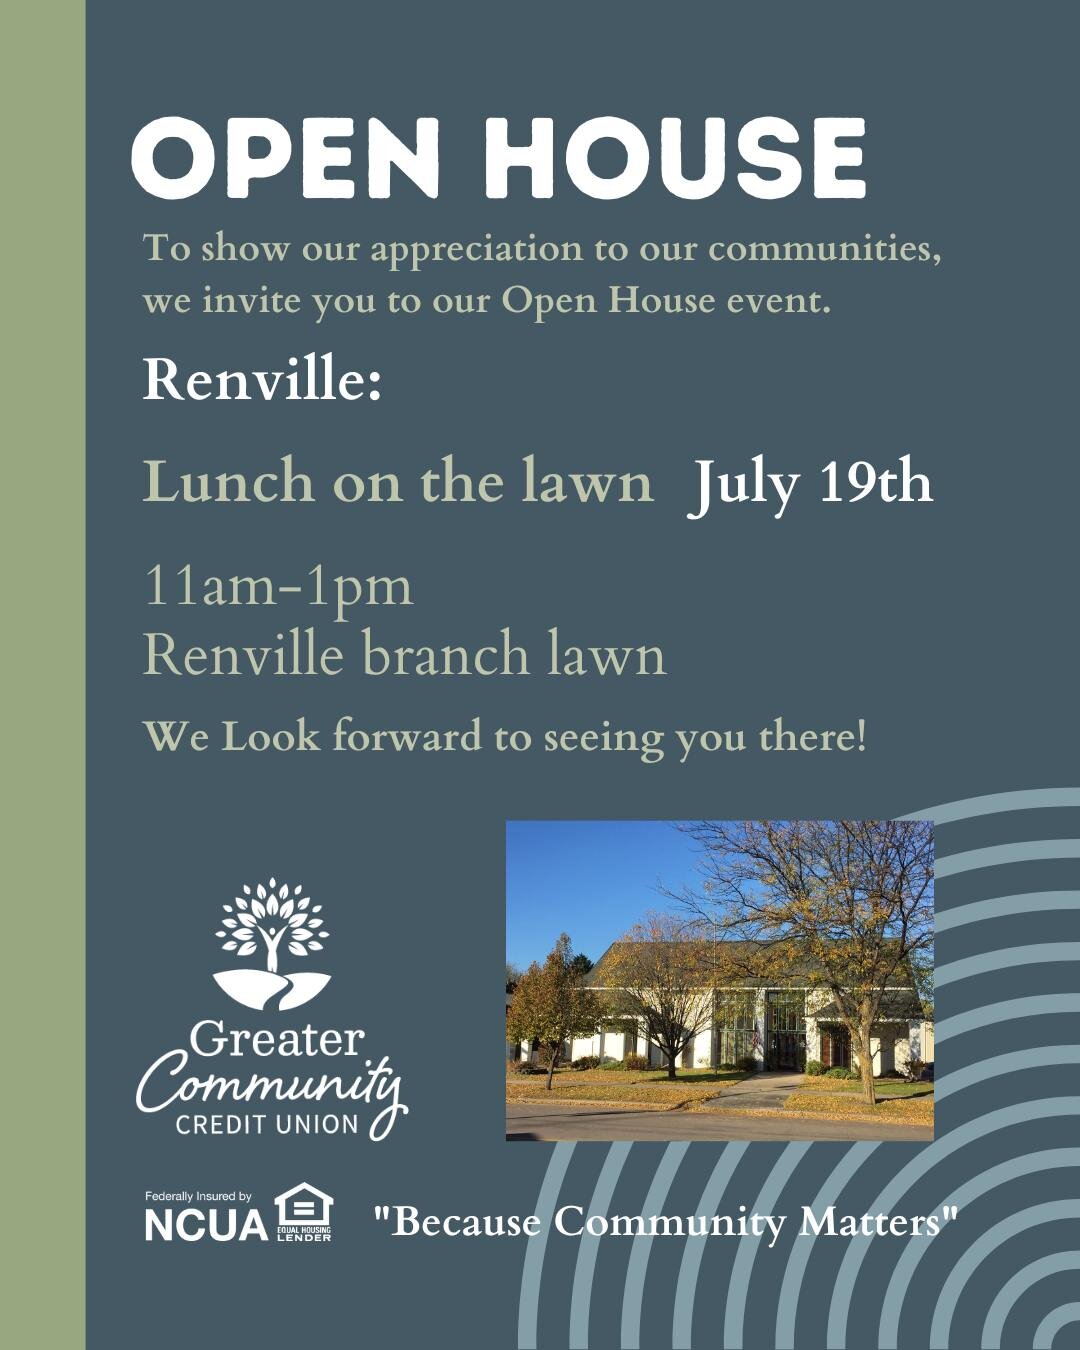 Join us for our Open House event in Renville on the front lawn. See you Wednesday, July 19th!

 #OpenHouseEvent #renvillemn #creditunionmembers